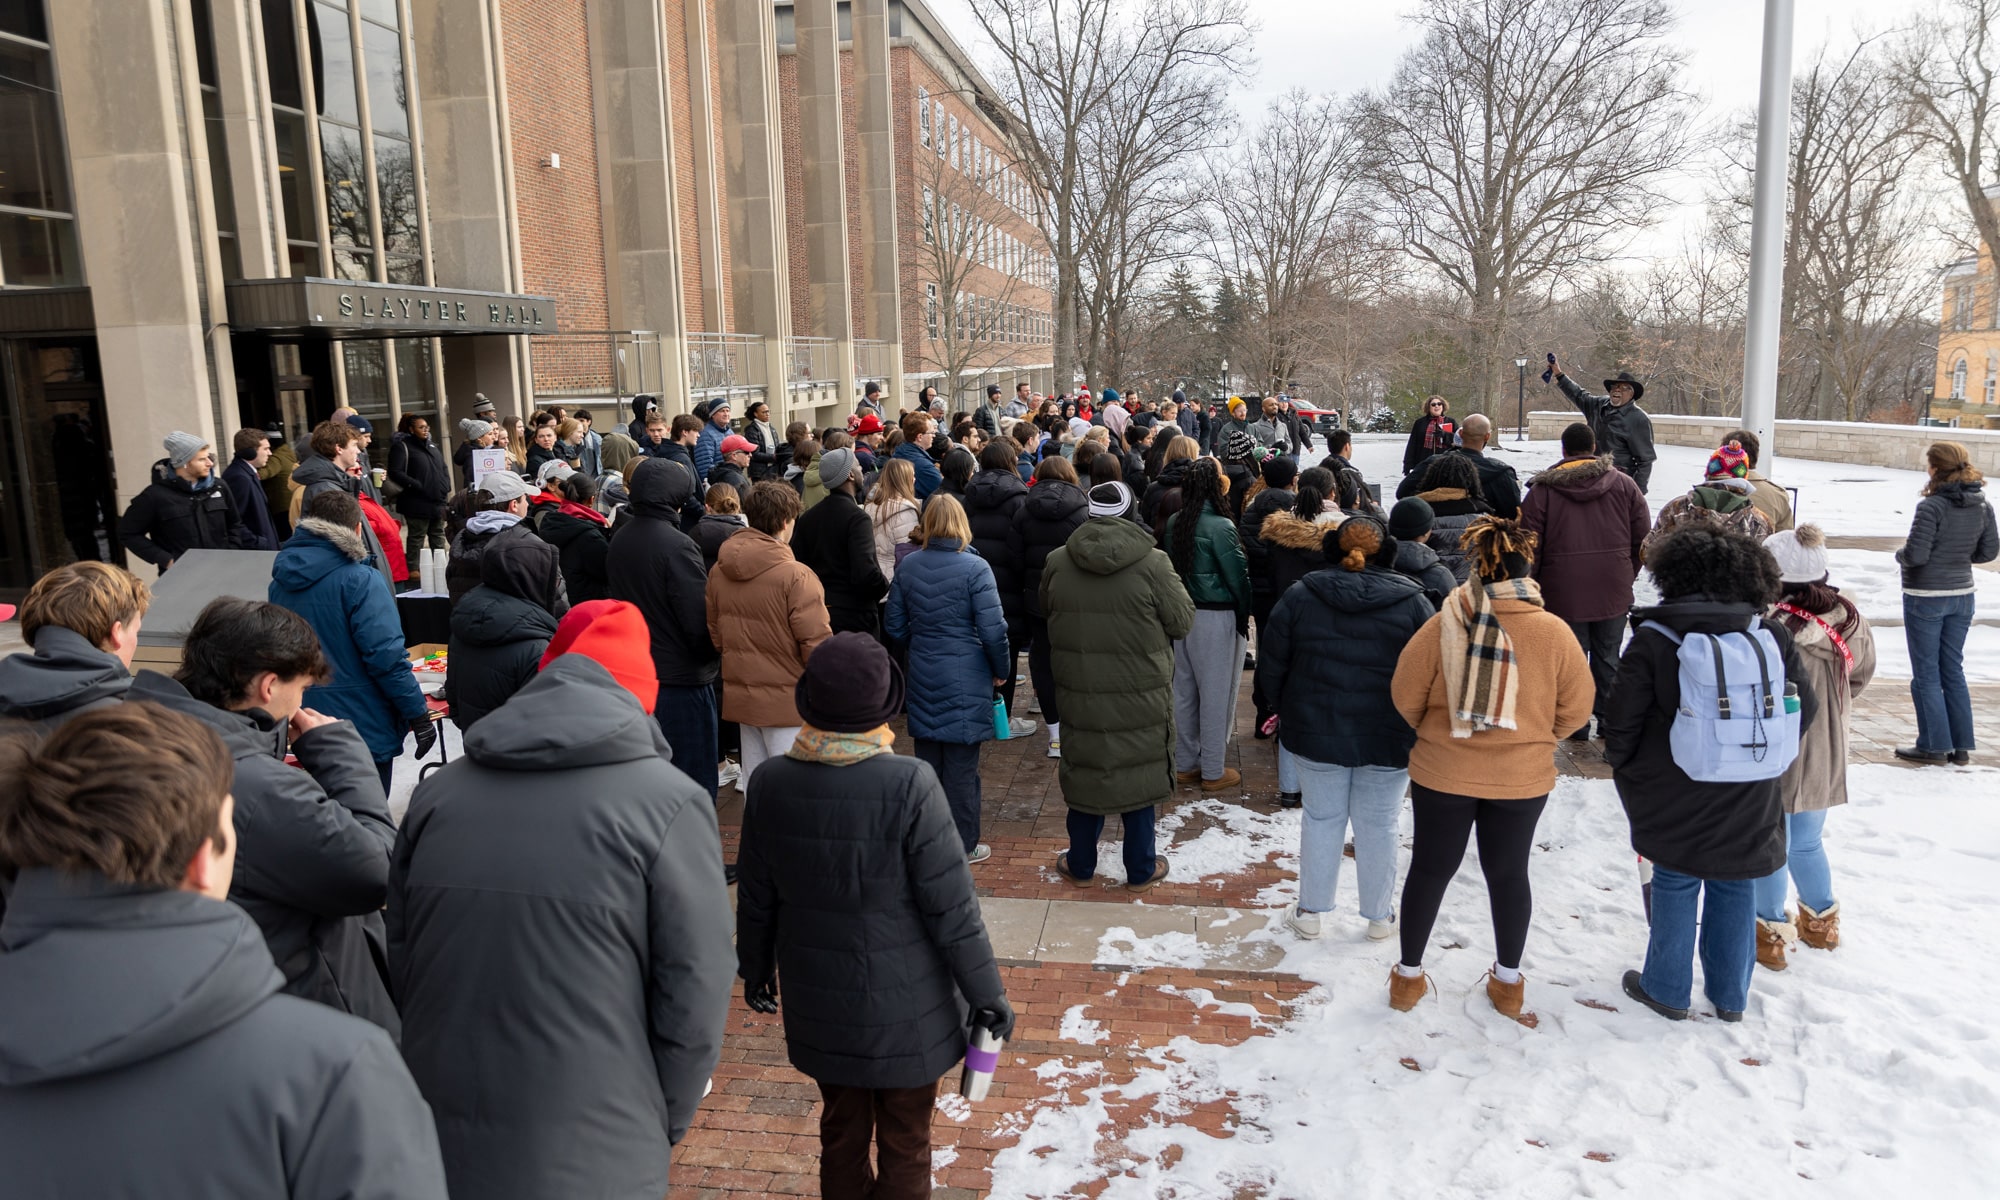 Students, faculty, and staff assemble outside Slayter Hall for the march to Mitchell Center as part of Denison’s Martin Luther King Jr. celebration.